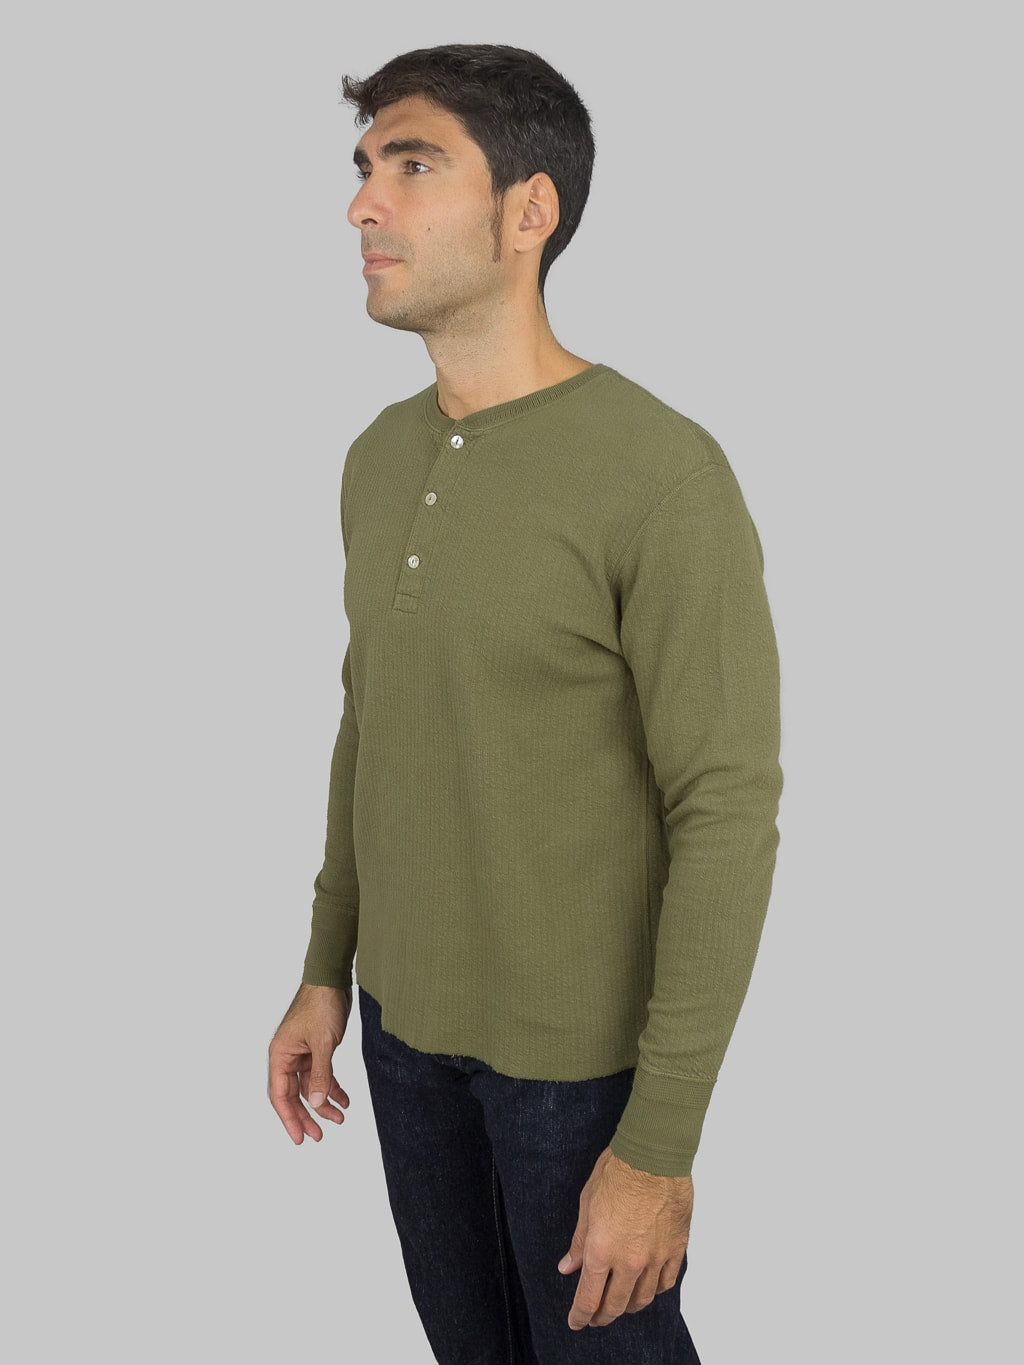 Loop Weft Double Face Jacquard henley Thermal army olive side fit